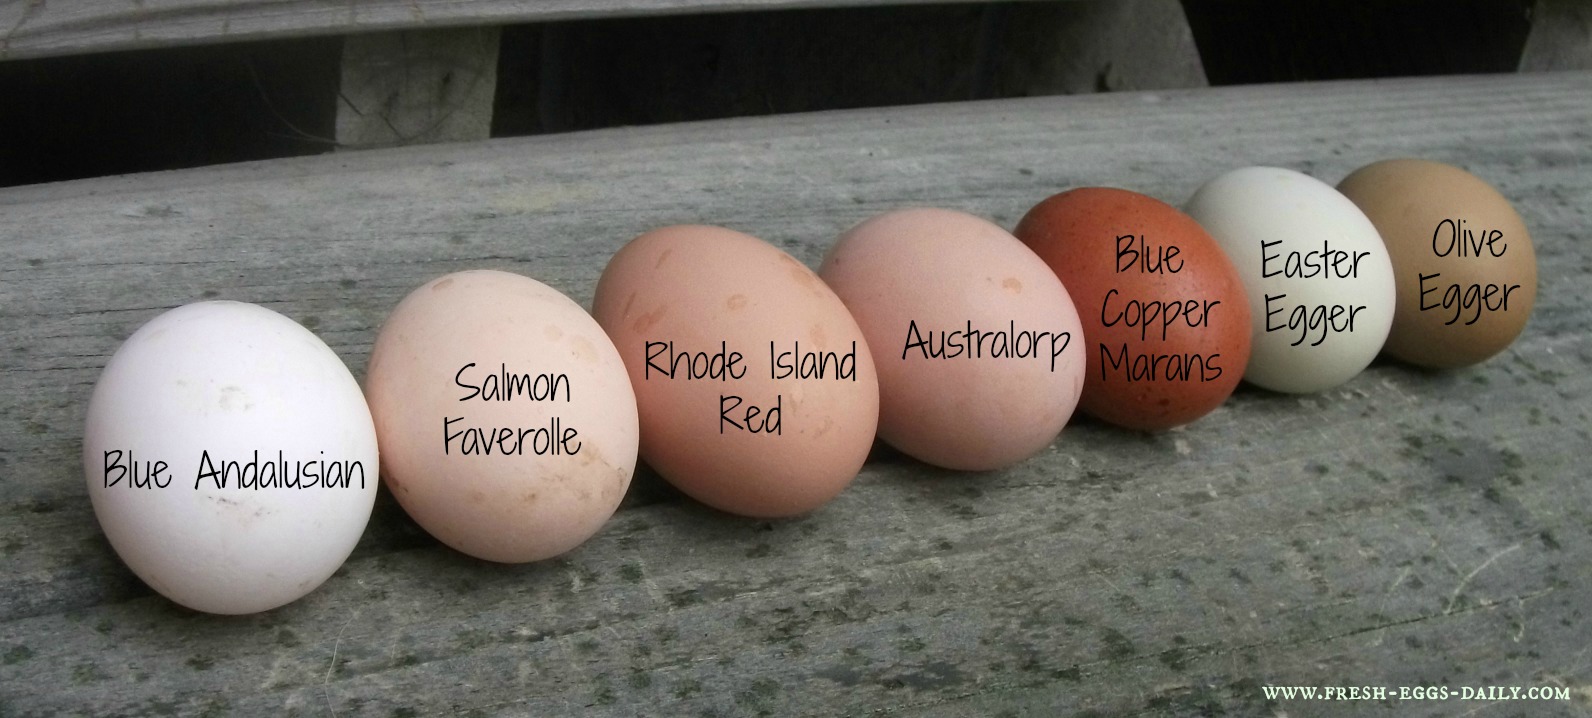 A Rainbow of Egg Colors - What Breed of Chicken Lays Which Color Egg